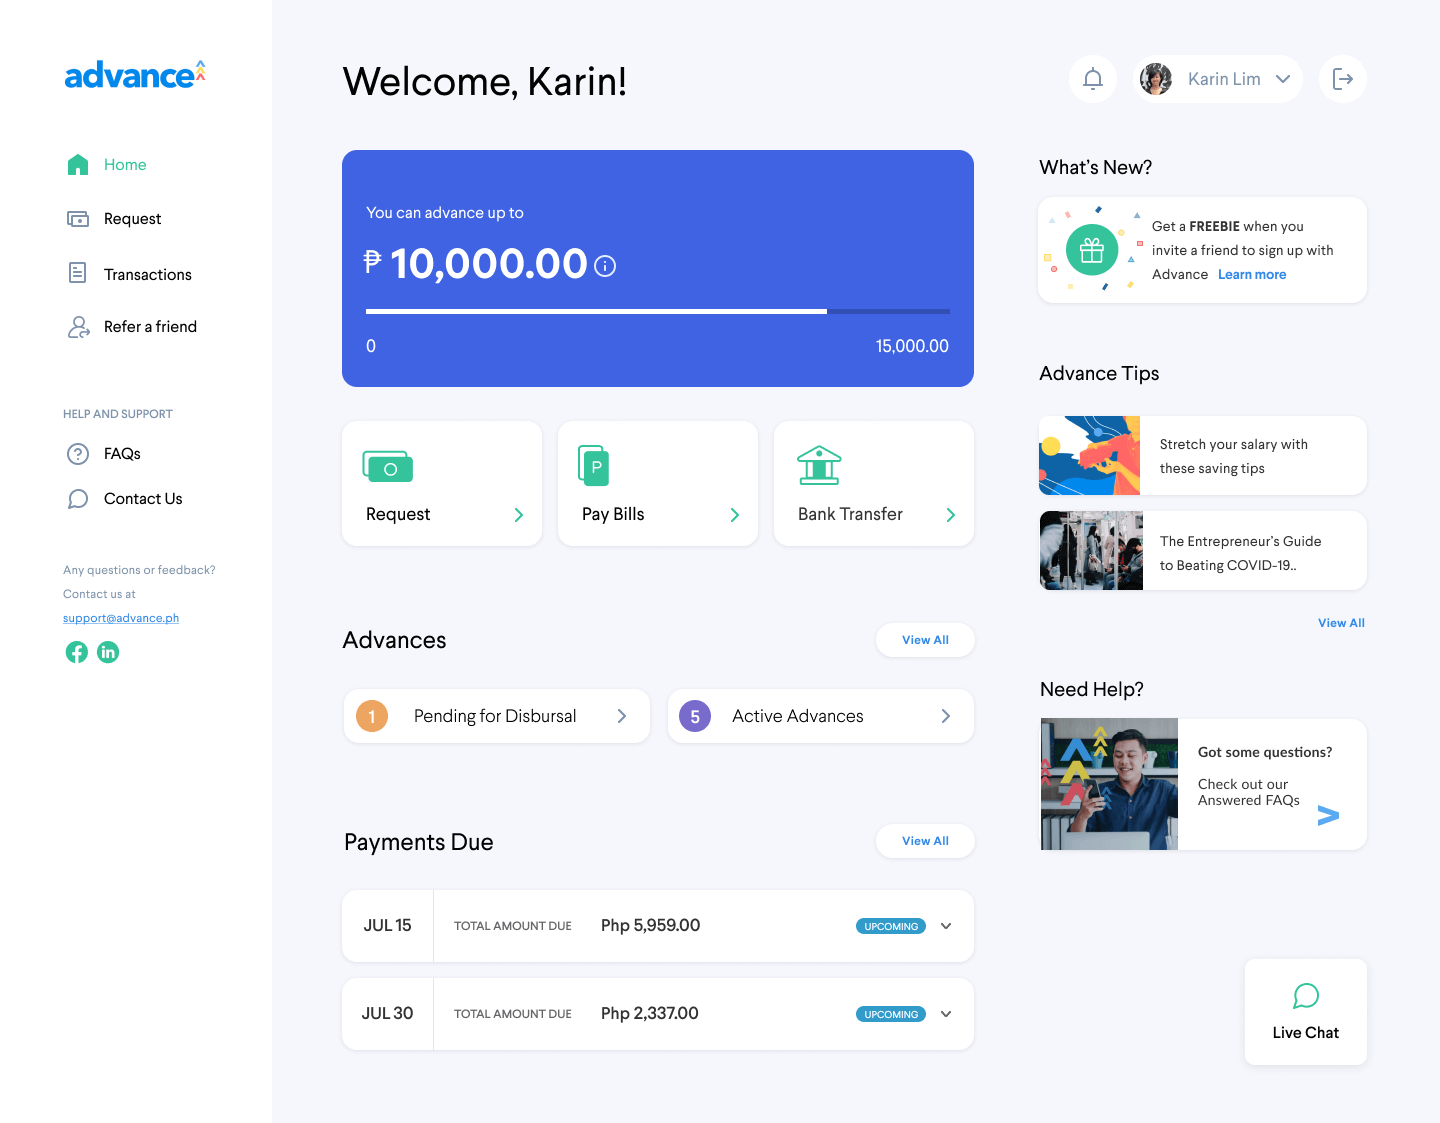 Advance's new user dashboard for release in 2021